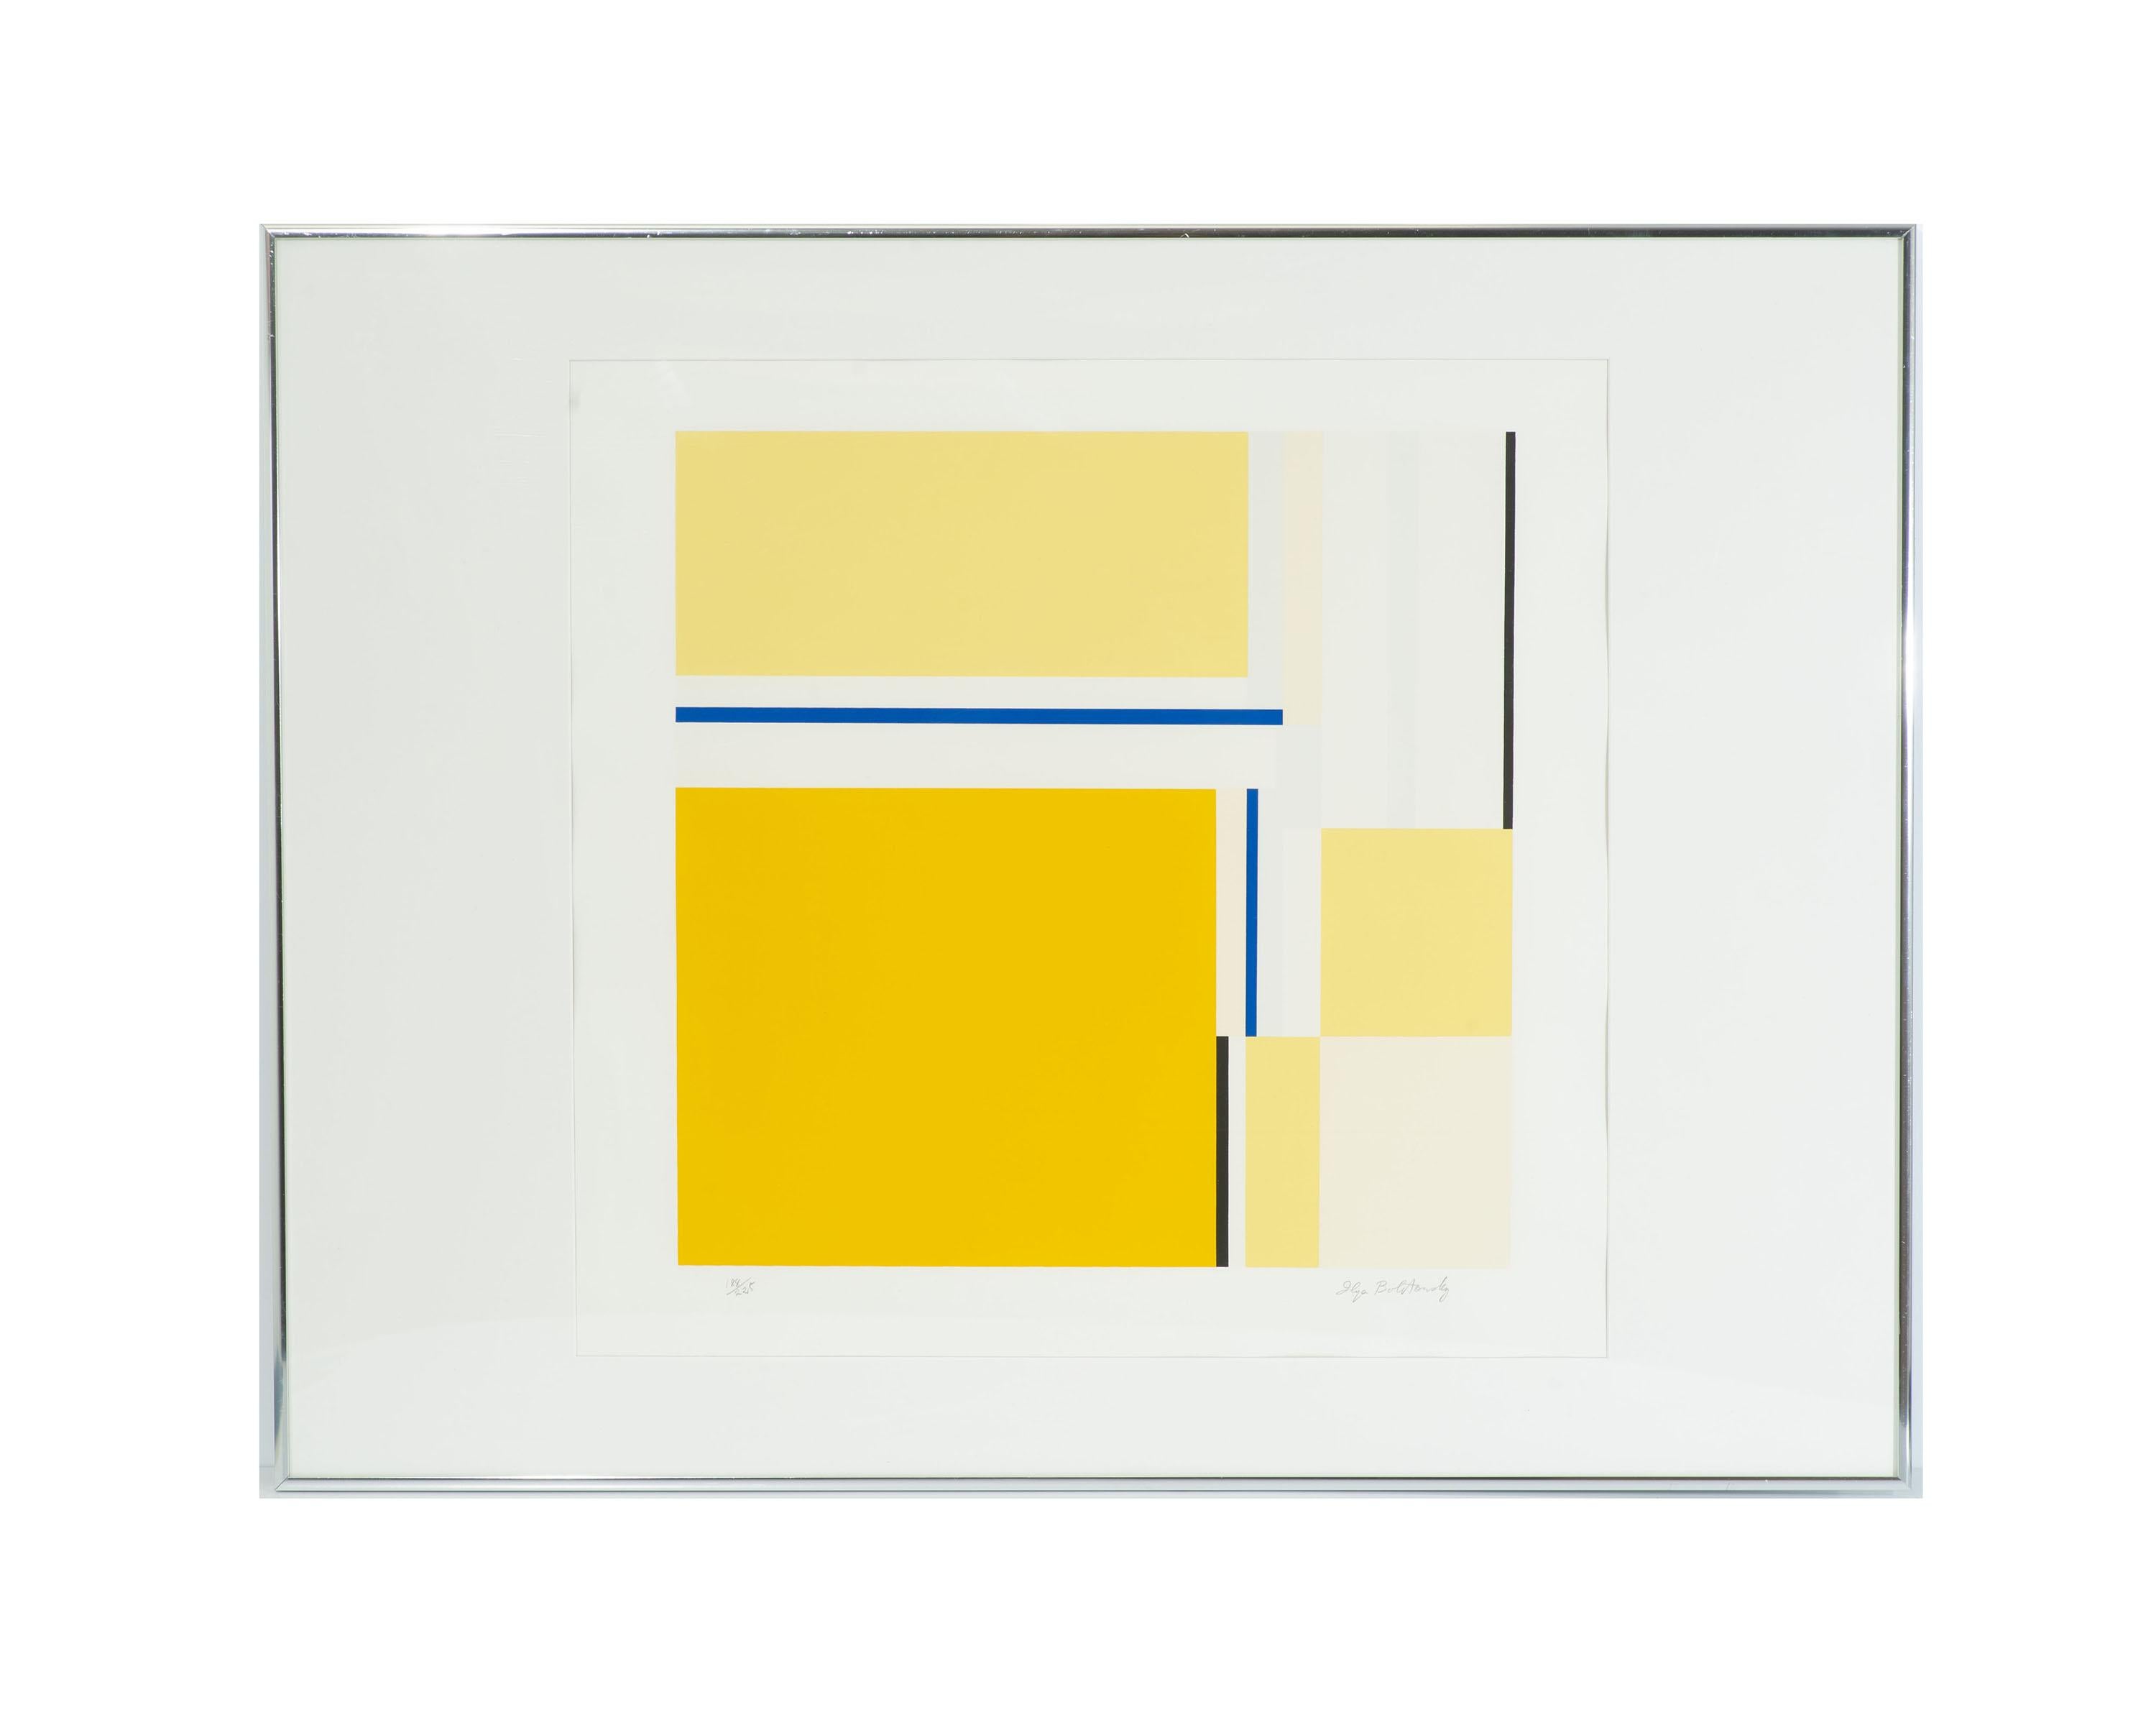 A signed limited edition Op Art serigraph by Russian-American artist Ilya Bolotowsky (1907-1981). The work uses richly colored black, white, blue and yellow shapes to comprise a larger square shaped composition against a white ground. Signed and